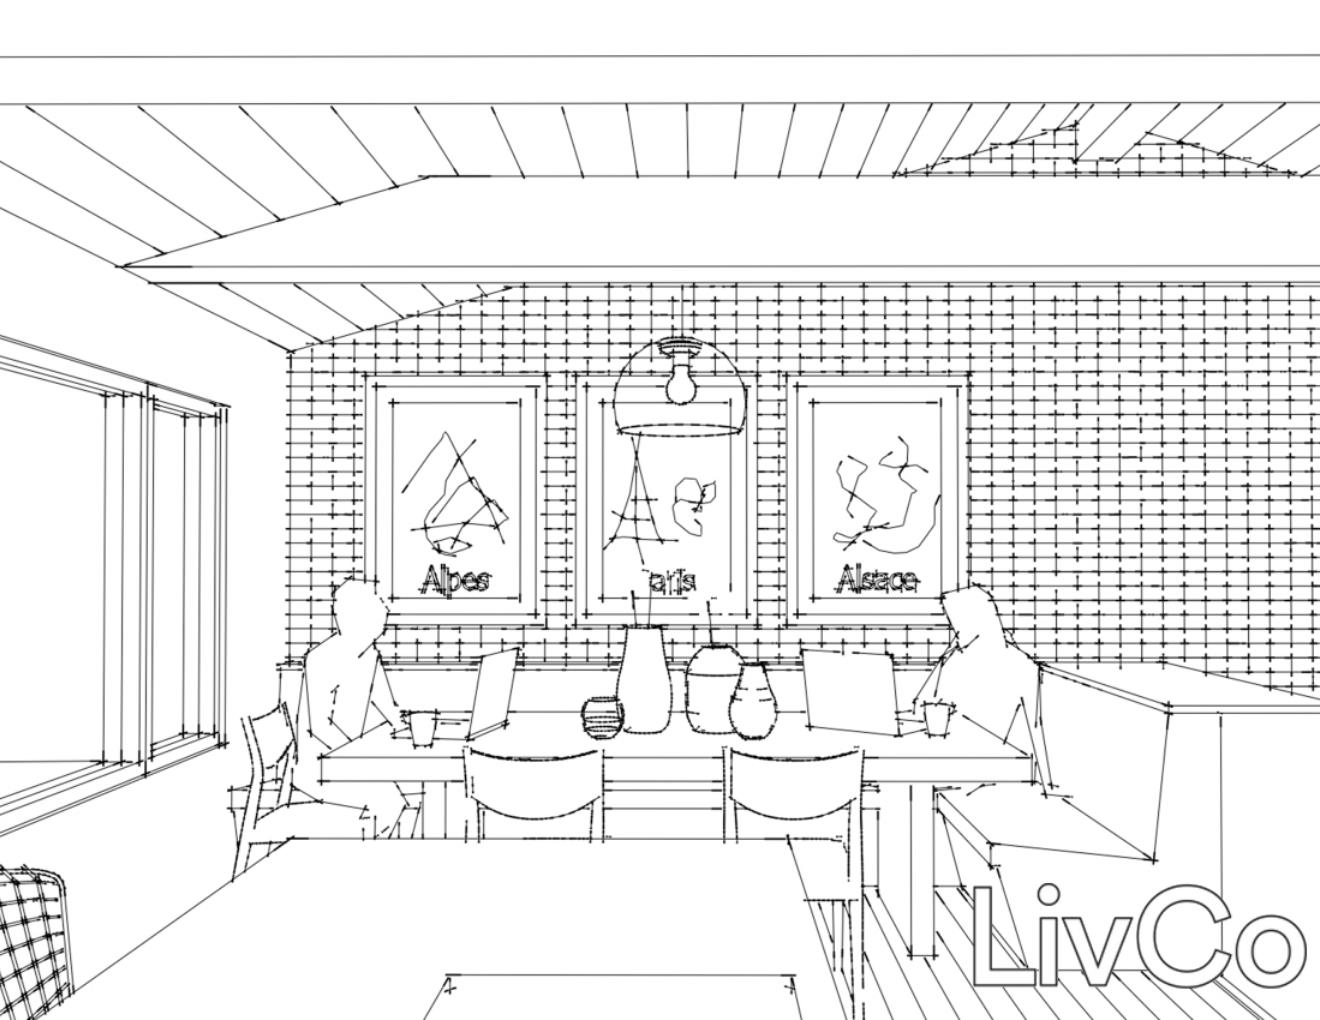 Perspective line drawing of people in a modern kitchen